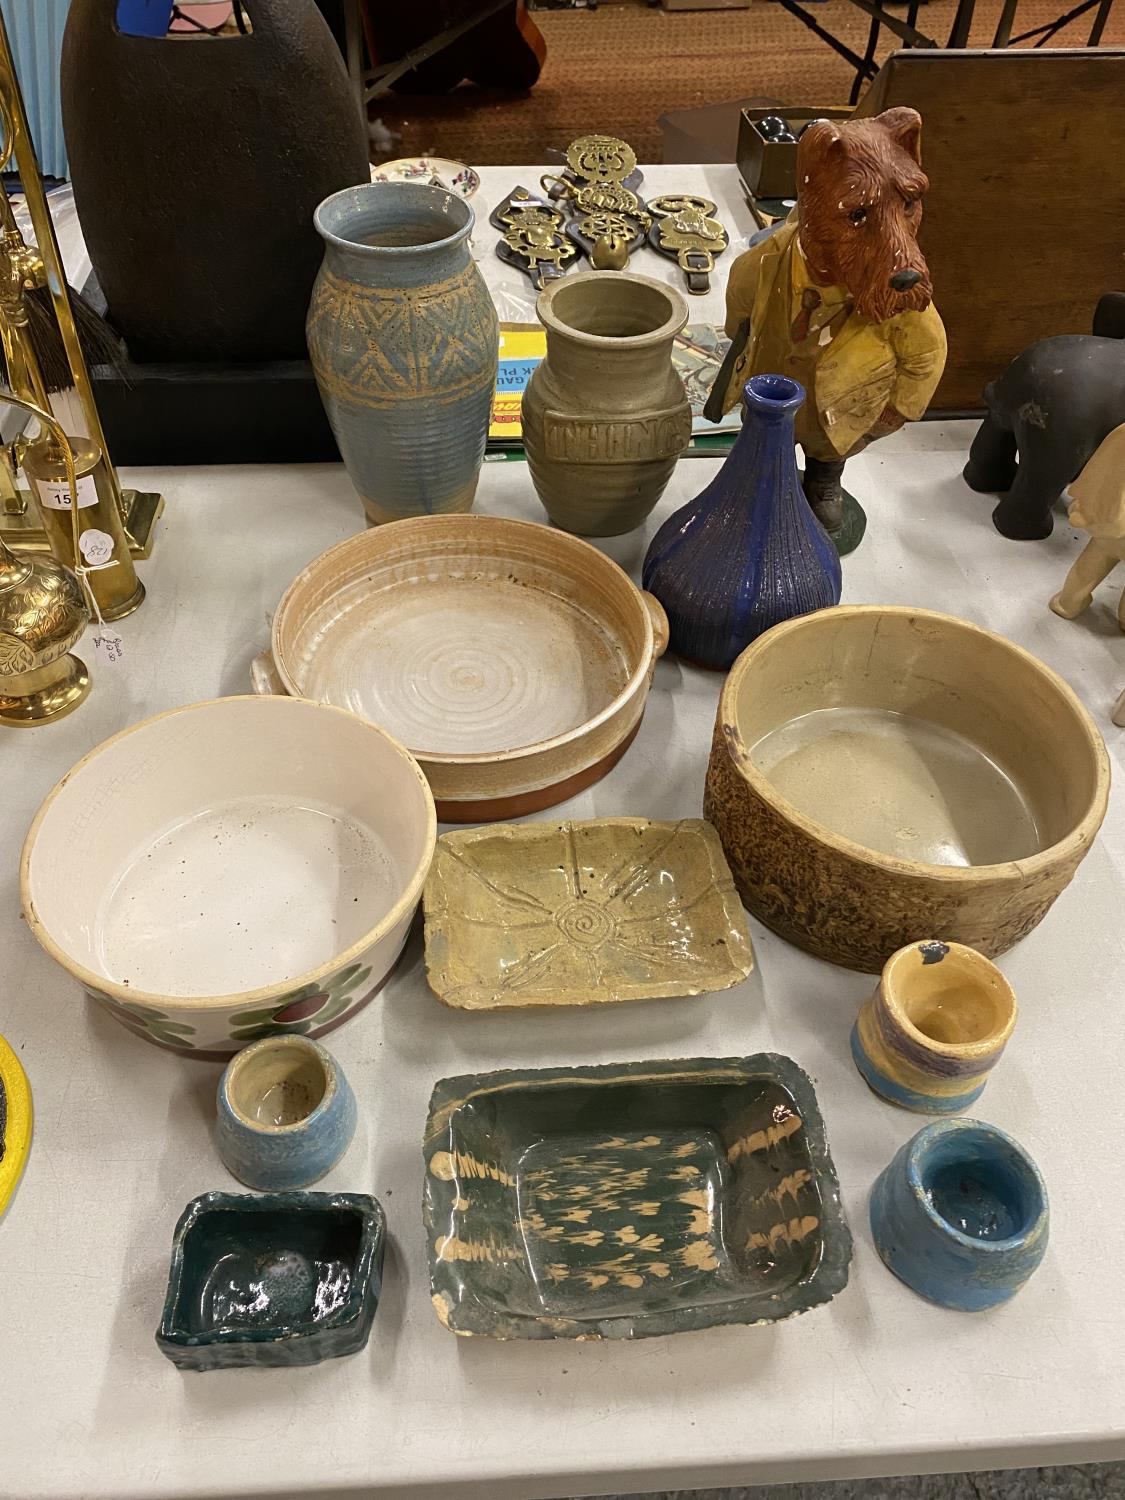 A MIXED COLLECTION OF POTTERY ITEMS INCLUDING VASES, BOWLS AND TRINKET DISHES ETC.